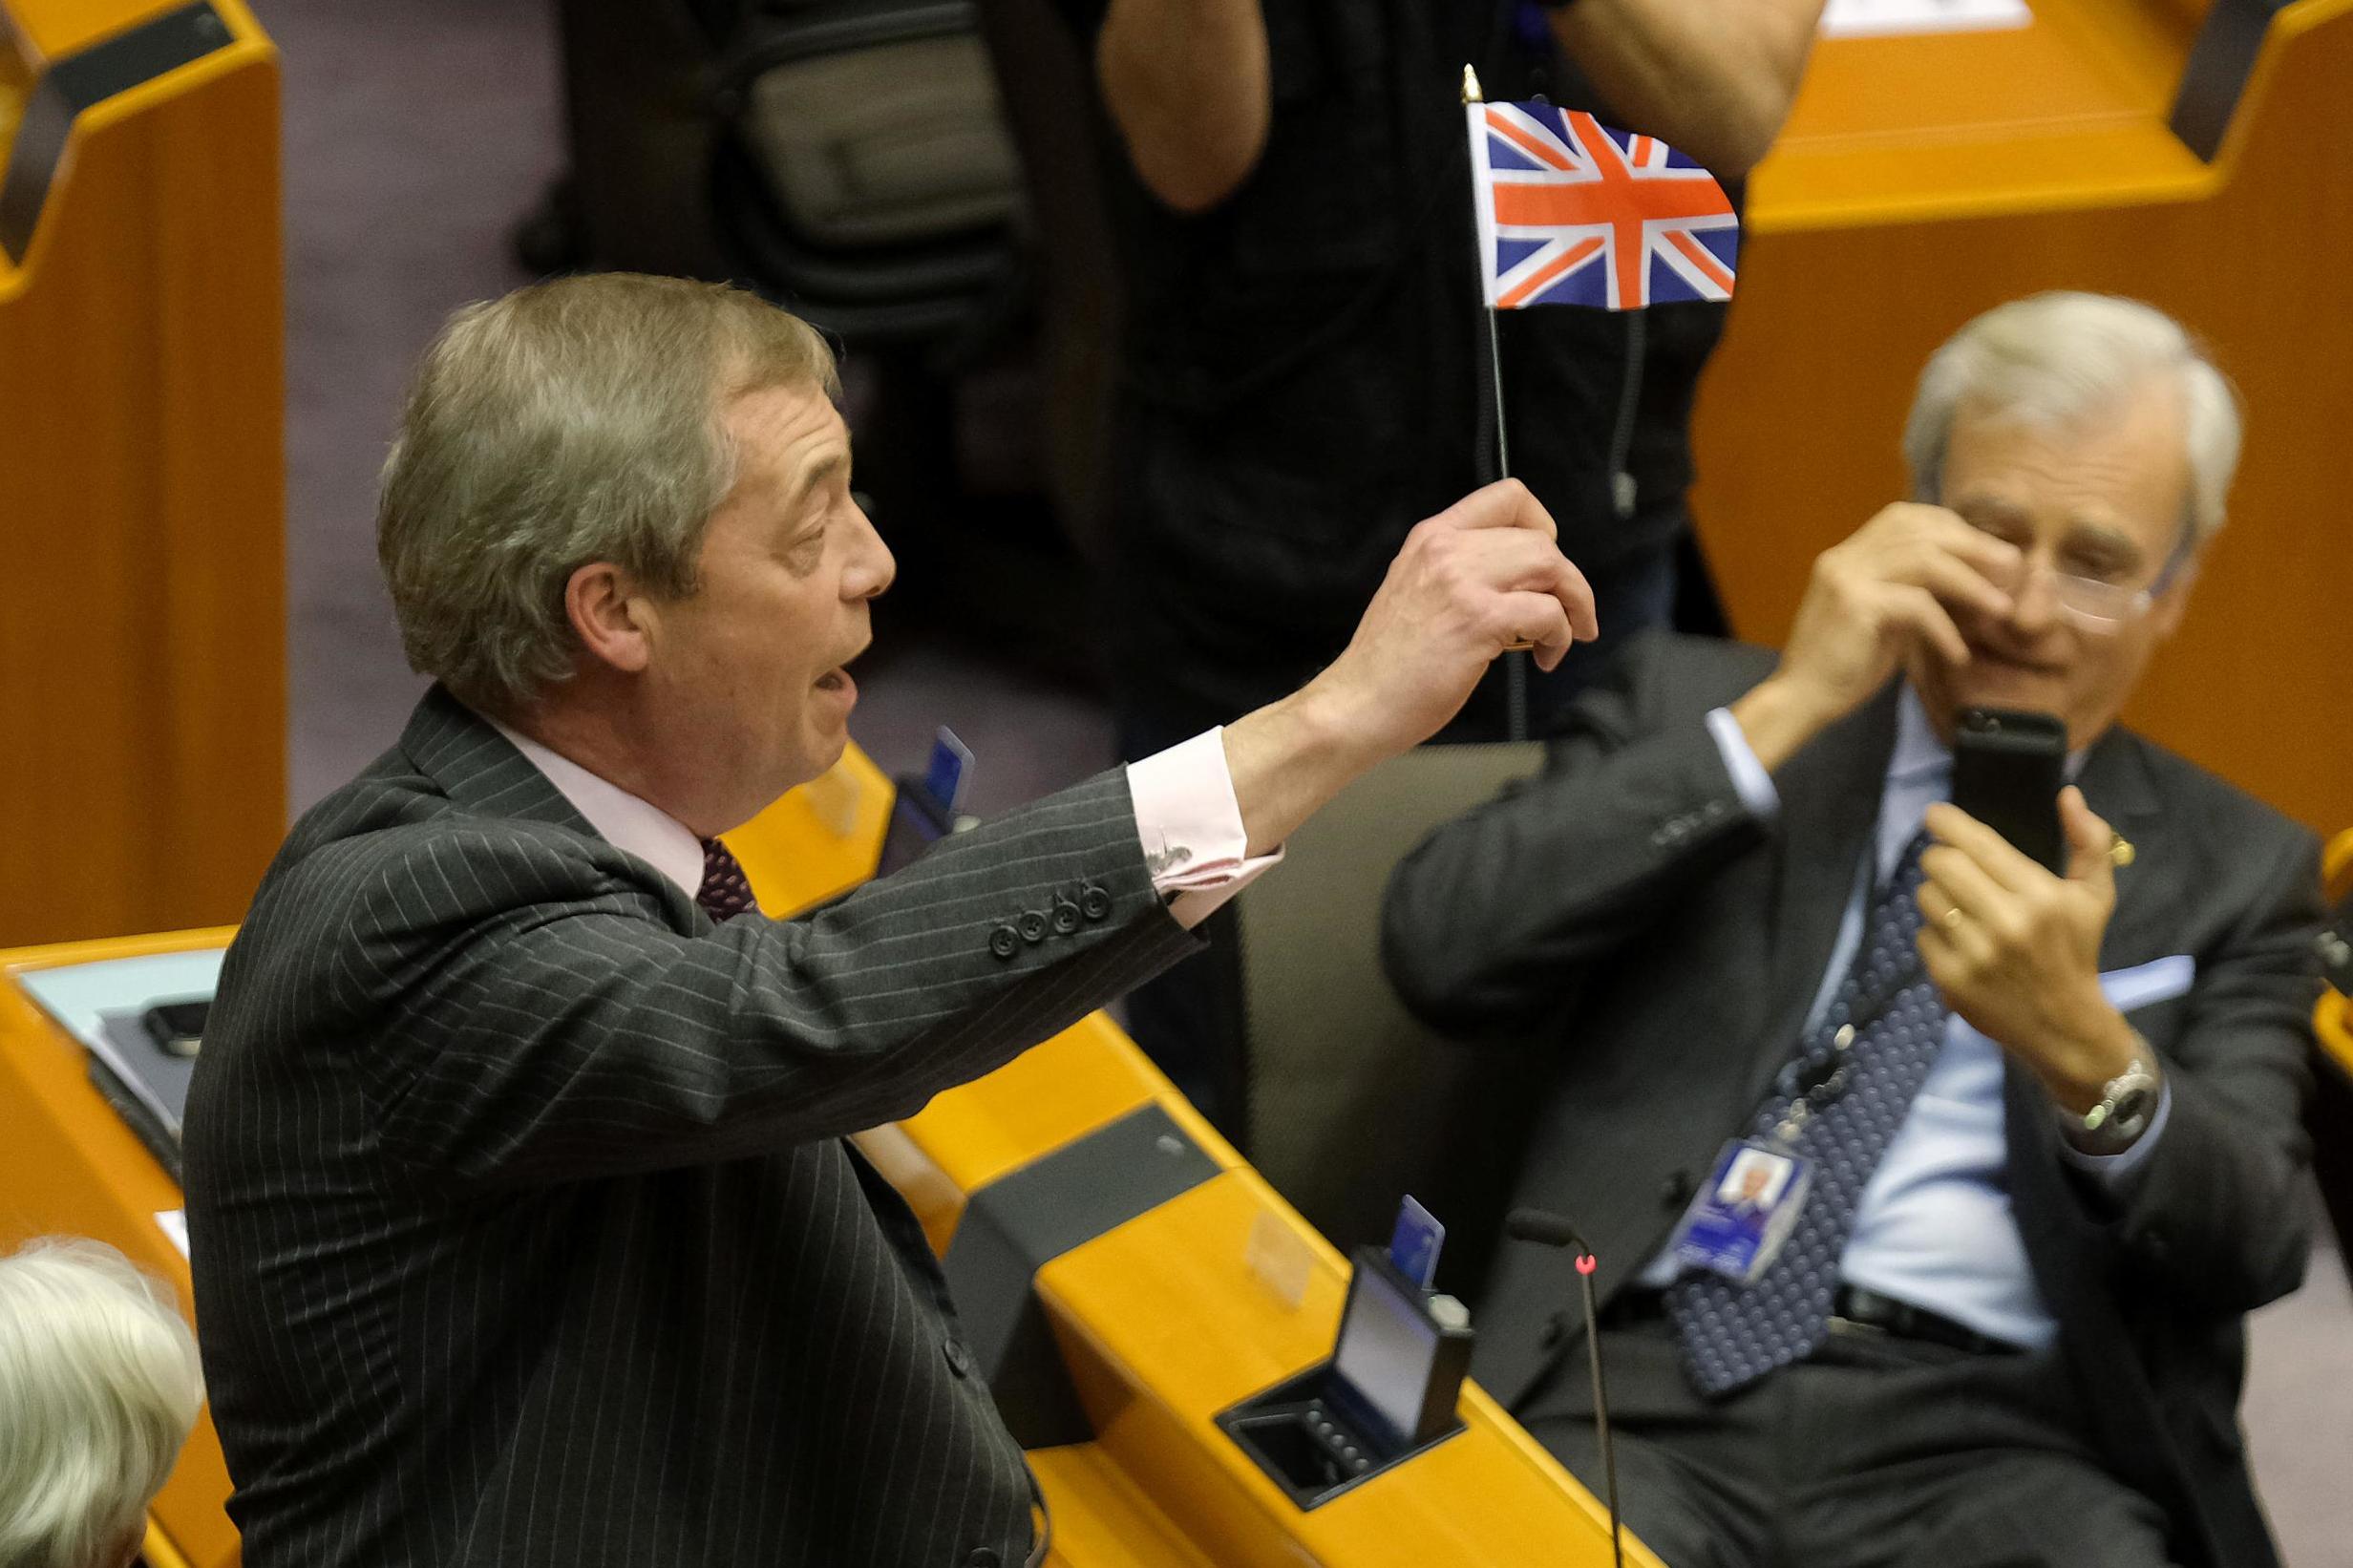 Farage waves a British flag while speaking at a session of the European parliament in which it is to approve the Brexit deal in January 2020 (Getty)